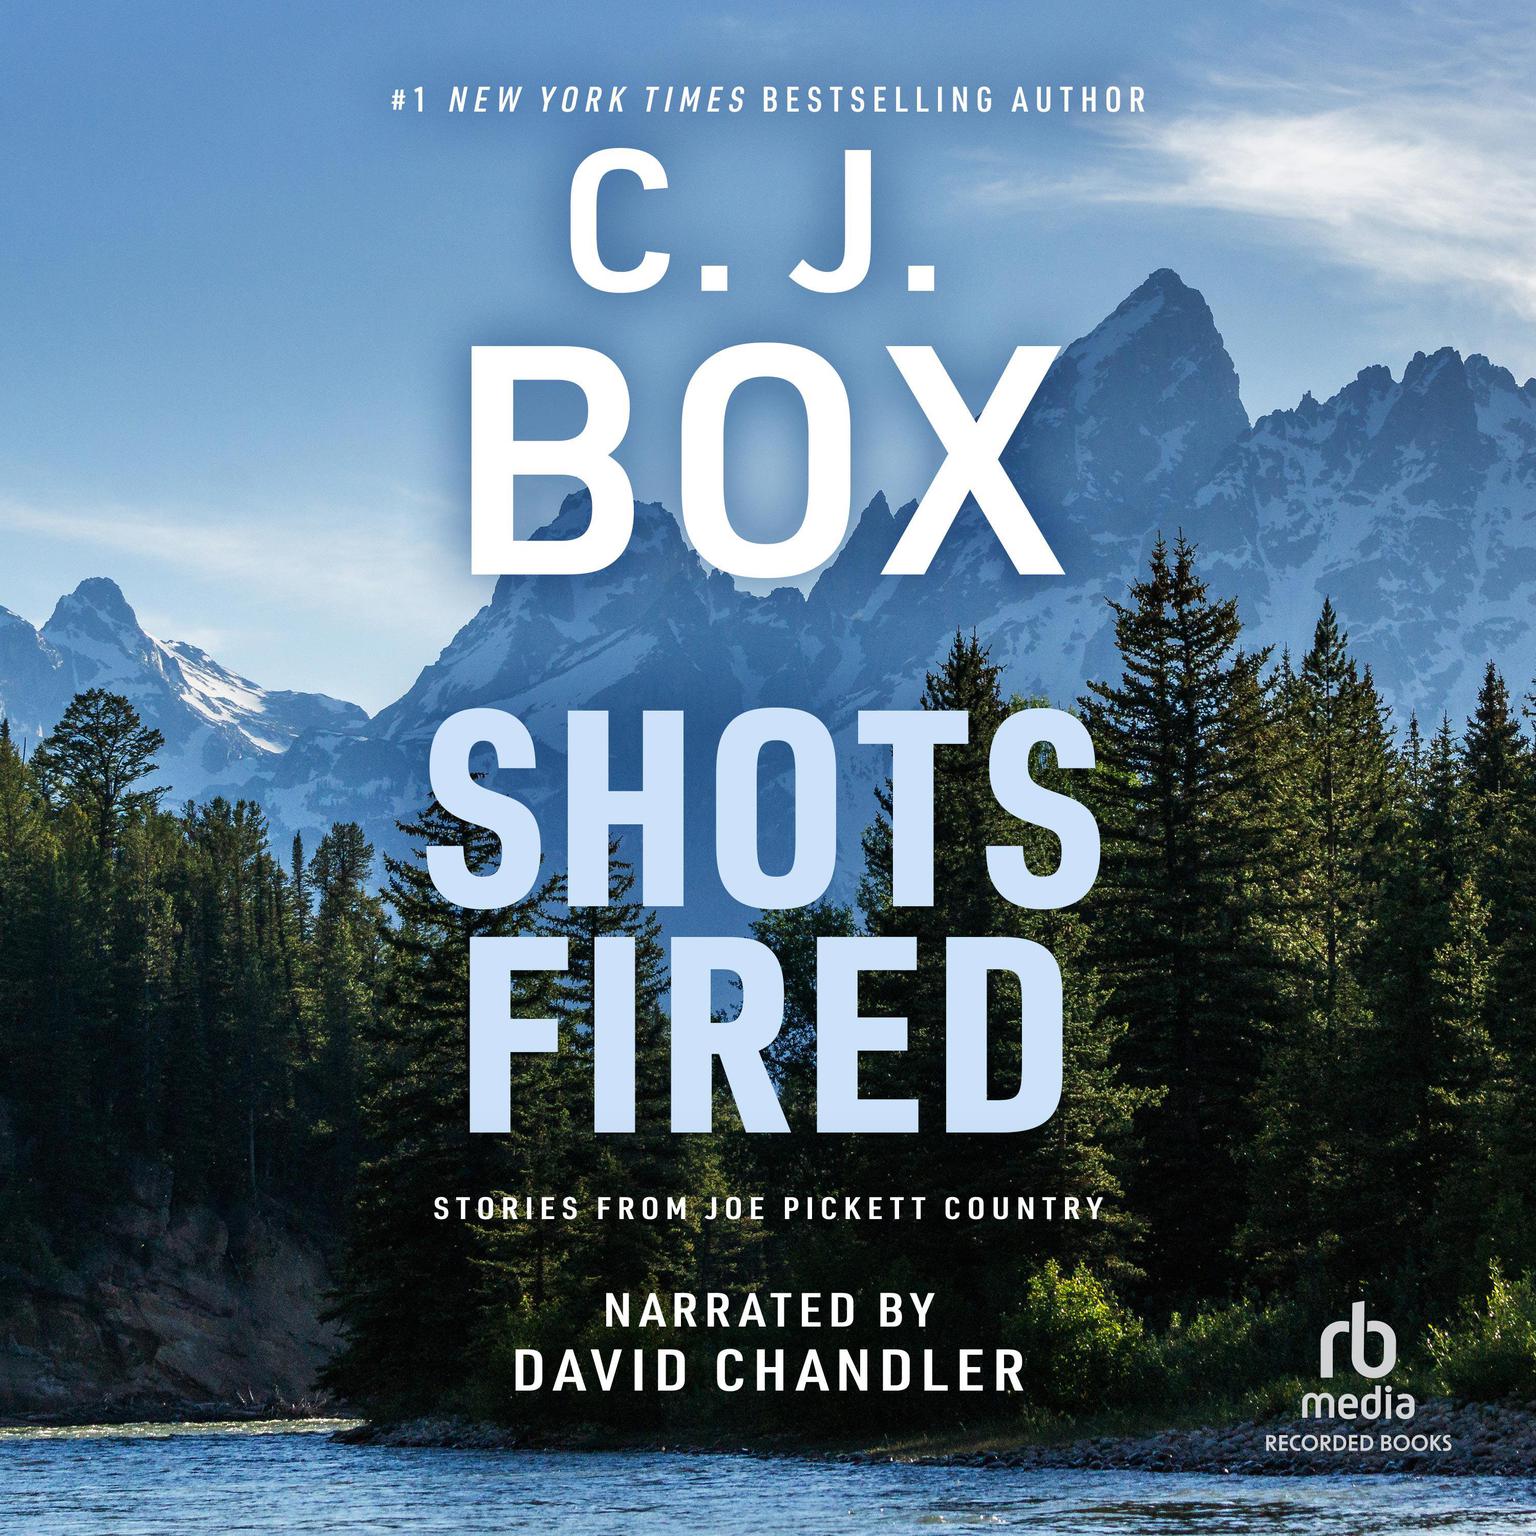 Shots Fired: Stories from Joe Pickett Country Audiobook, by C. J. Box